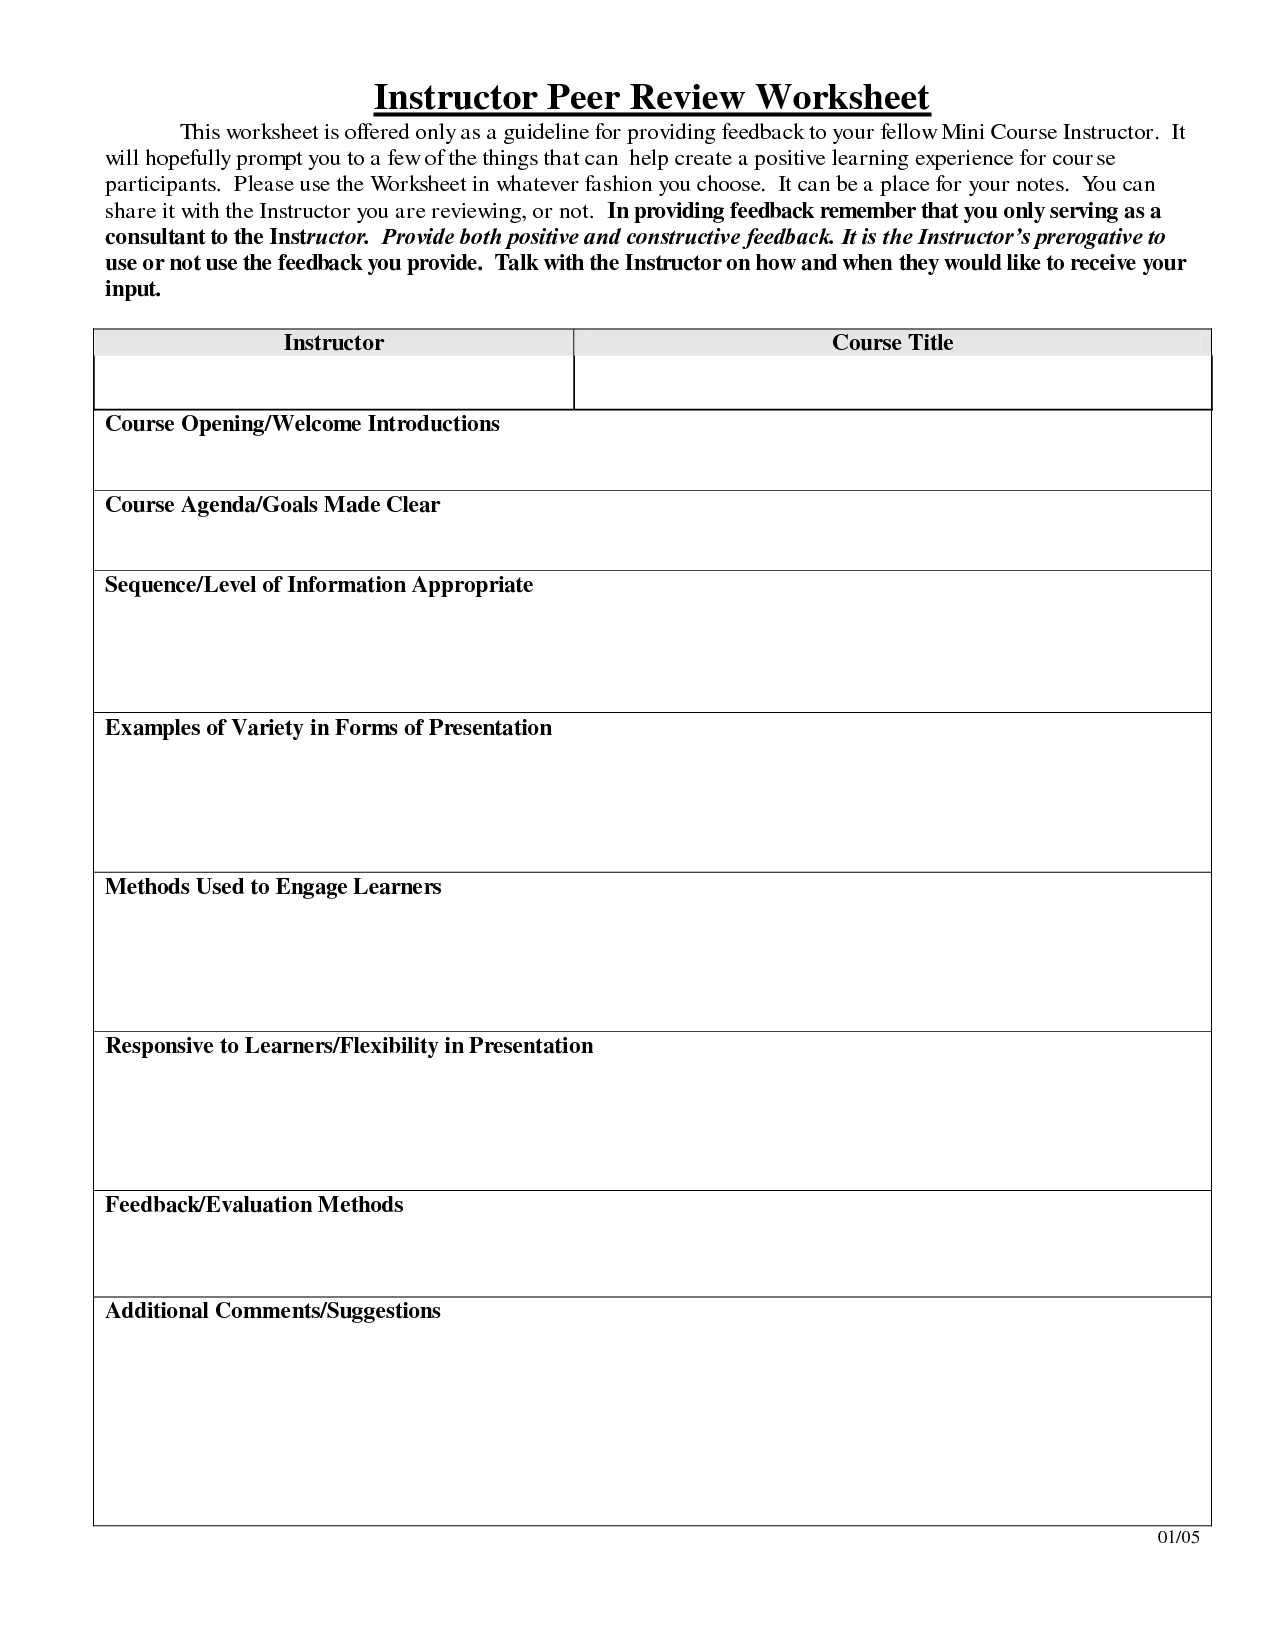 9 Best Images Of Article Review Worksheet Current Events Worksheet Template Free Peer Review